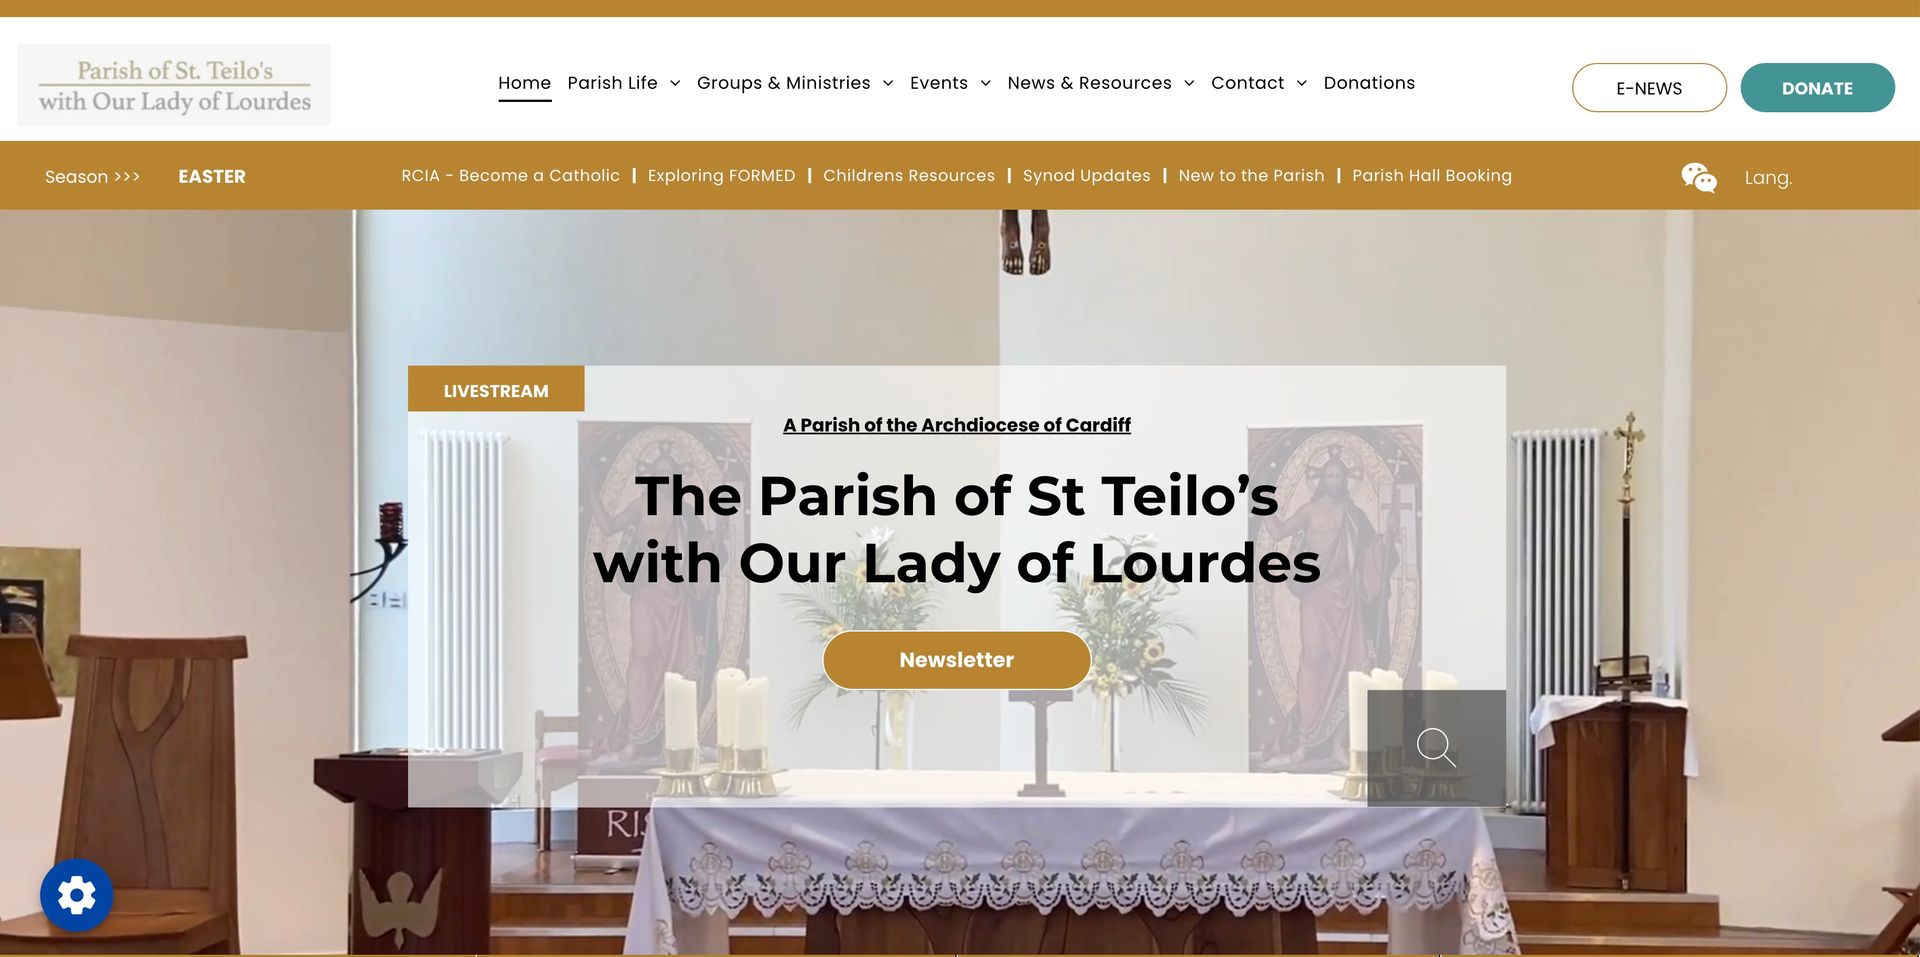 A screenshot of the parish of st. tello 's with our lady of lourdes website.